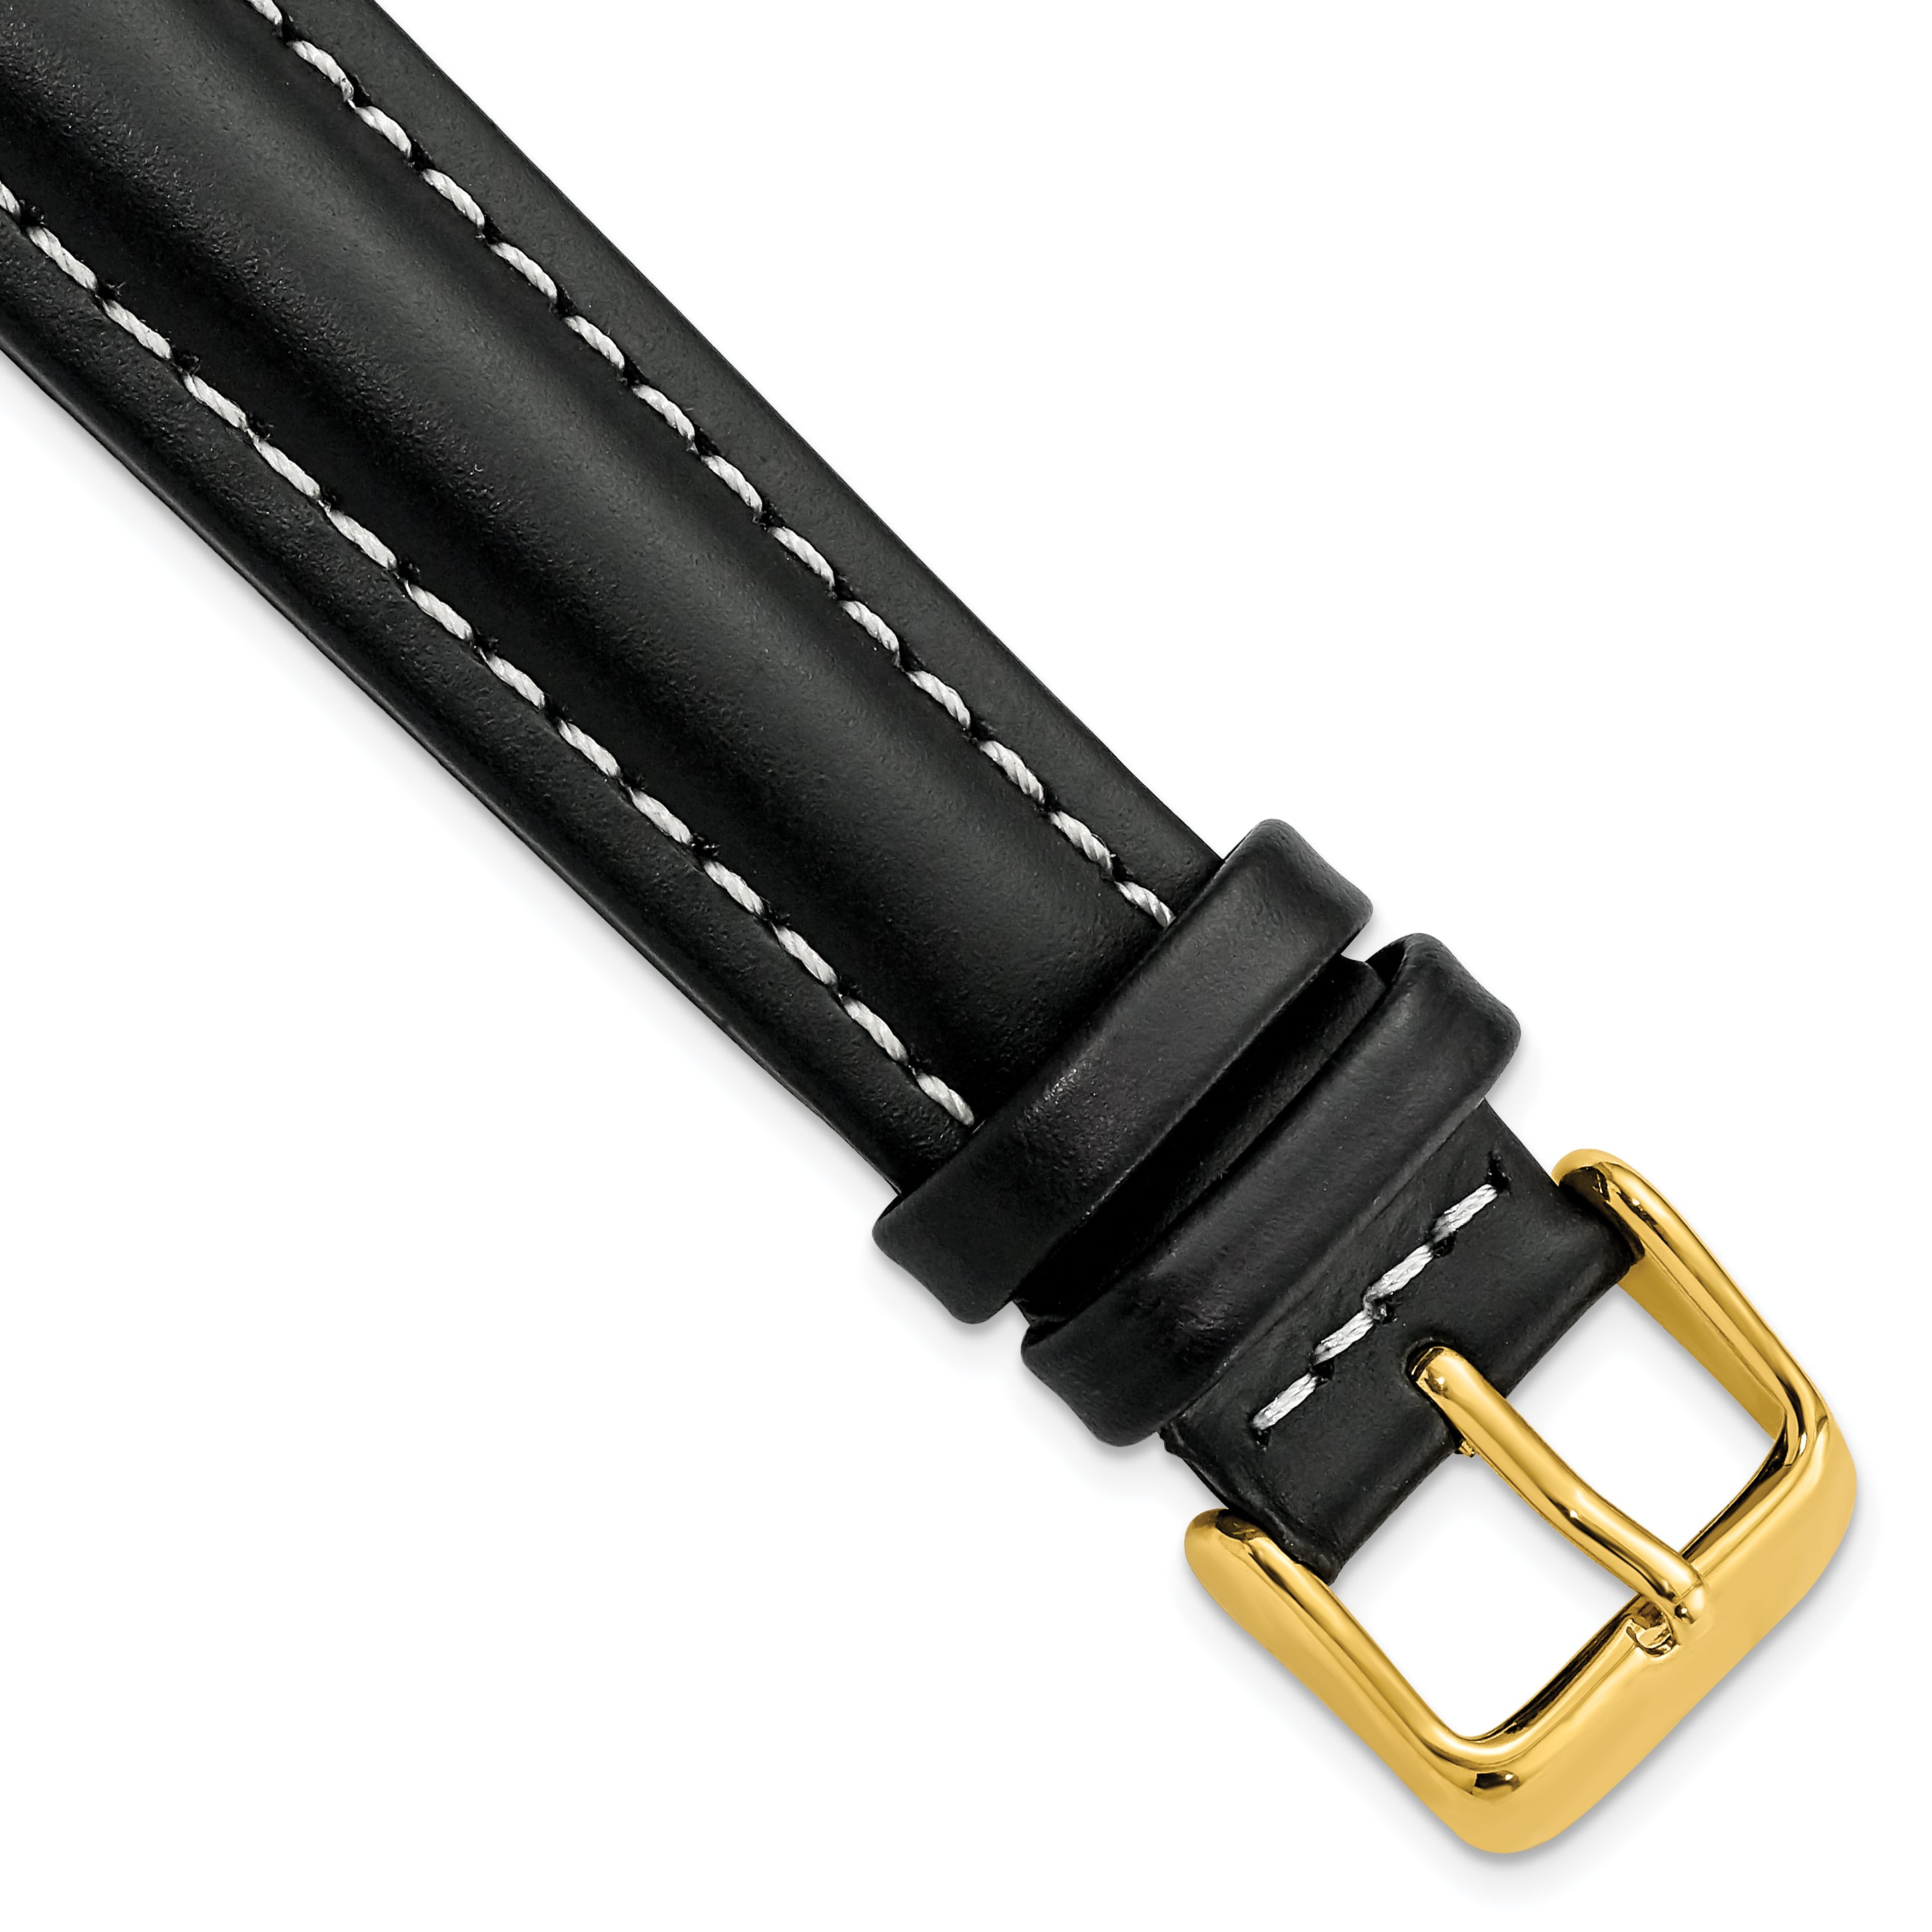 DeBeer 18mm Black Oil-tanned Leather with White Stitching and Gold-tone Buckle 7.5 inch Watch Band